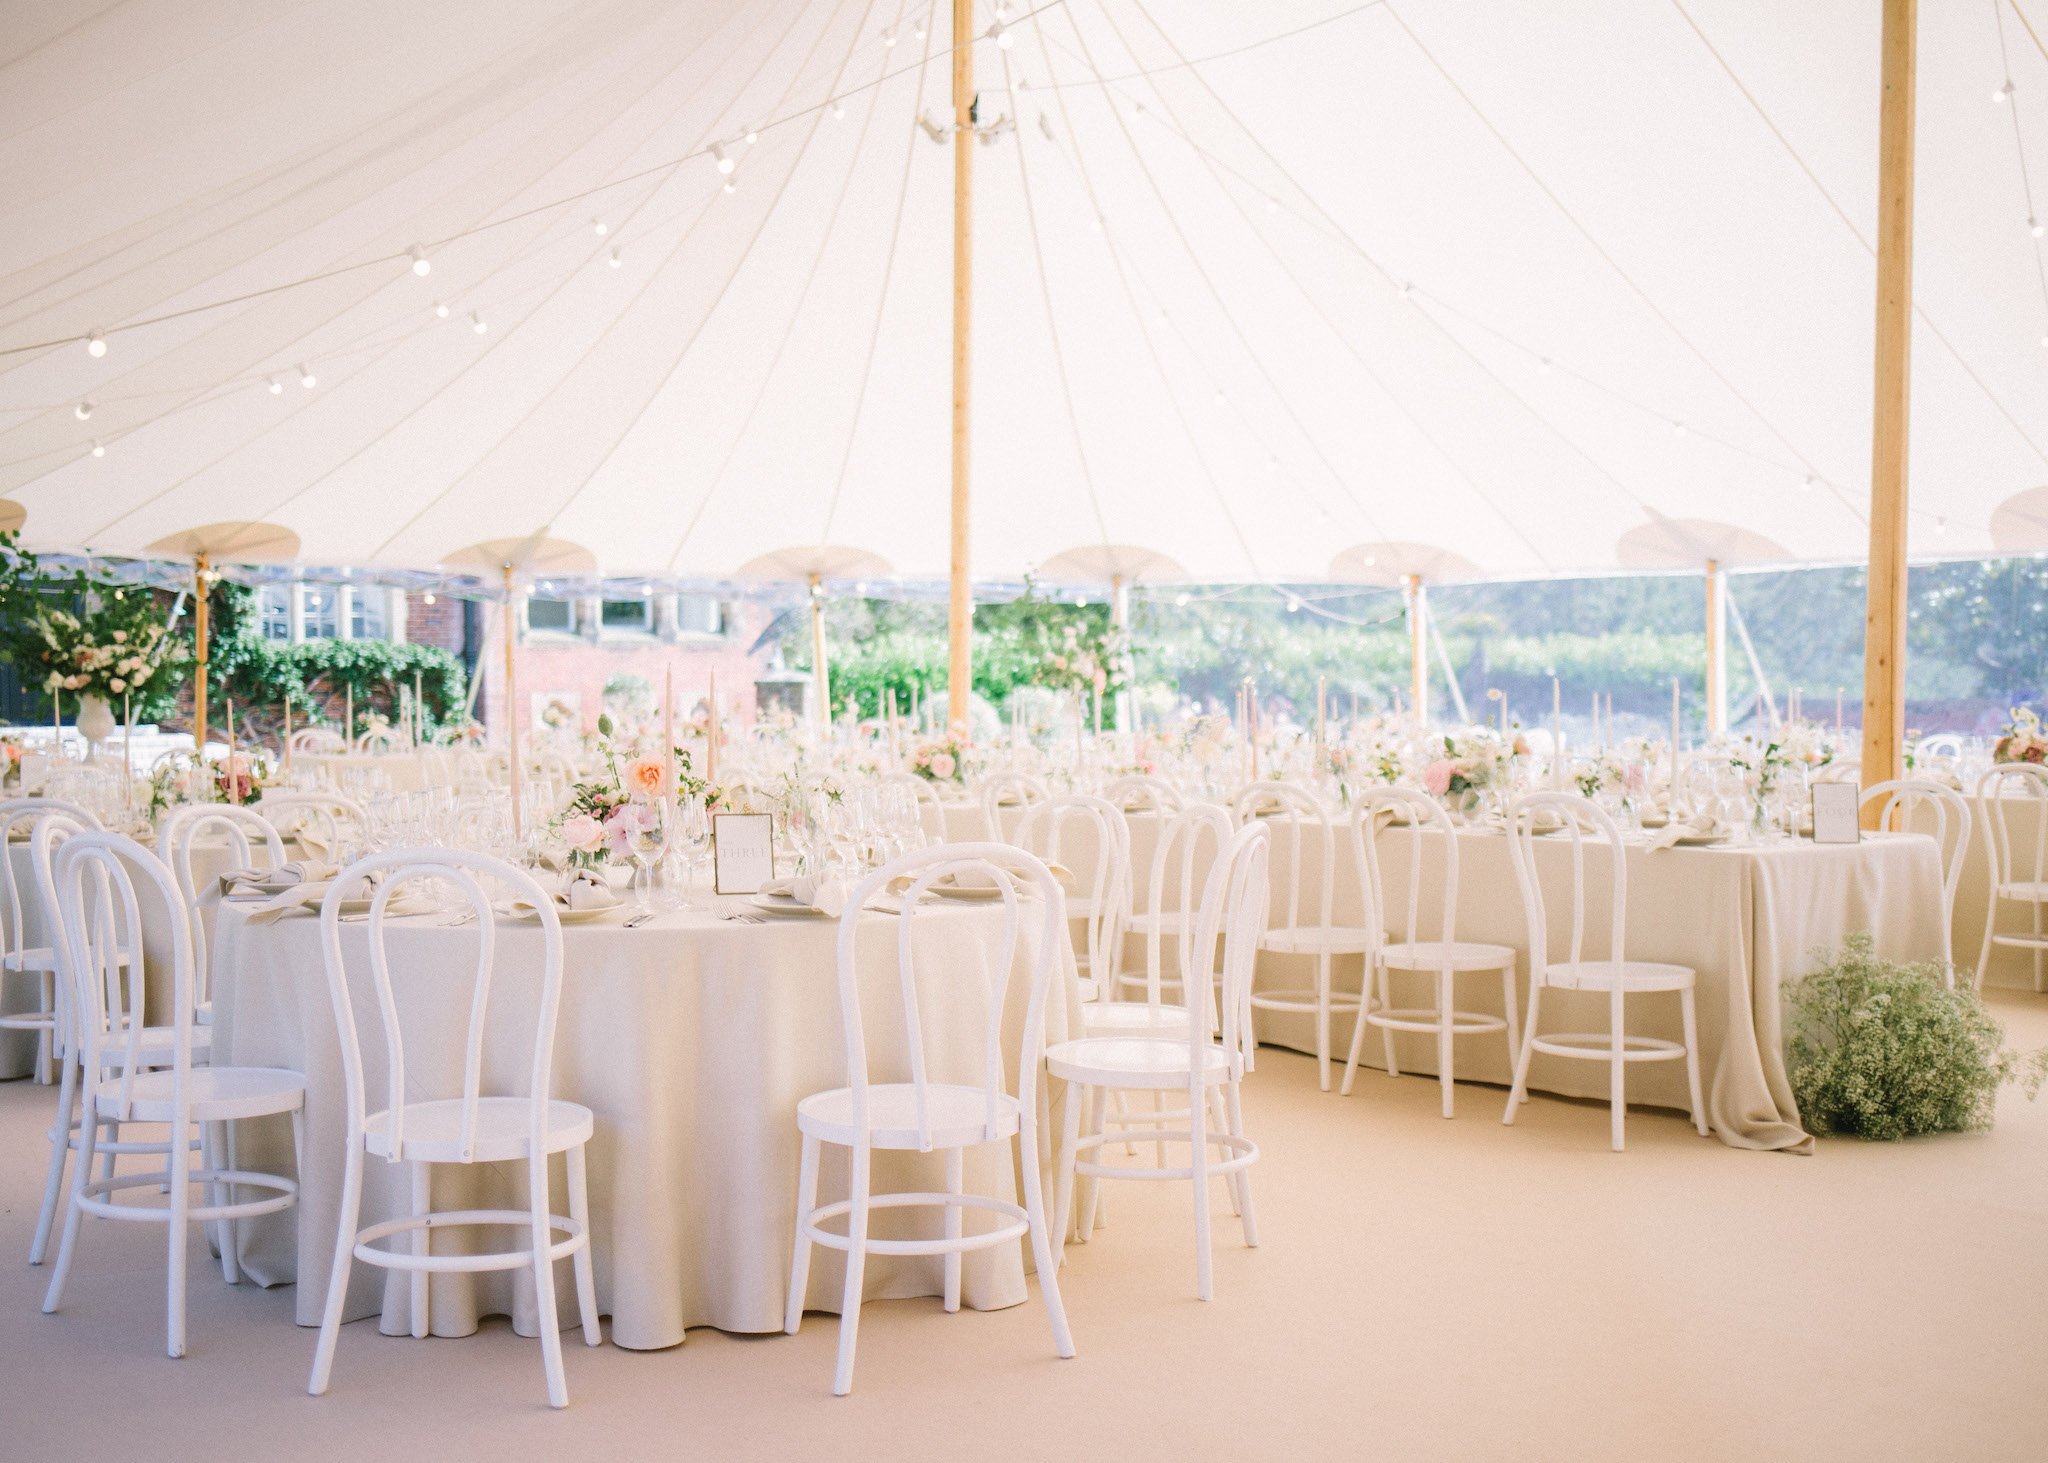 Ellie and Sam's Sperry Tent interior, designed by Katrina Otter Weddings with The Sail Tent Company.